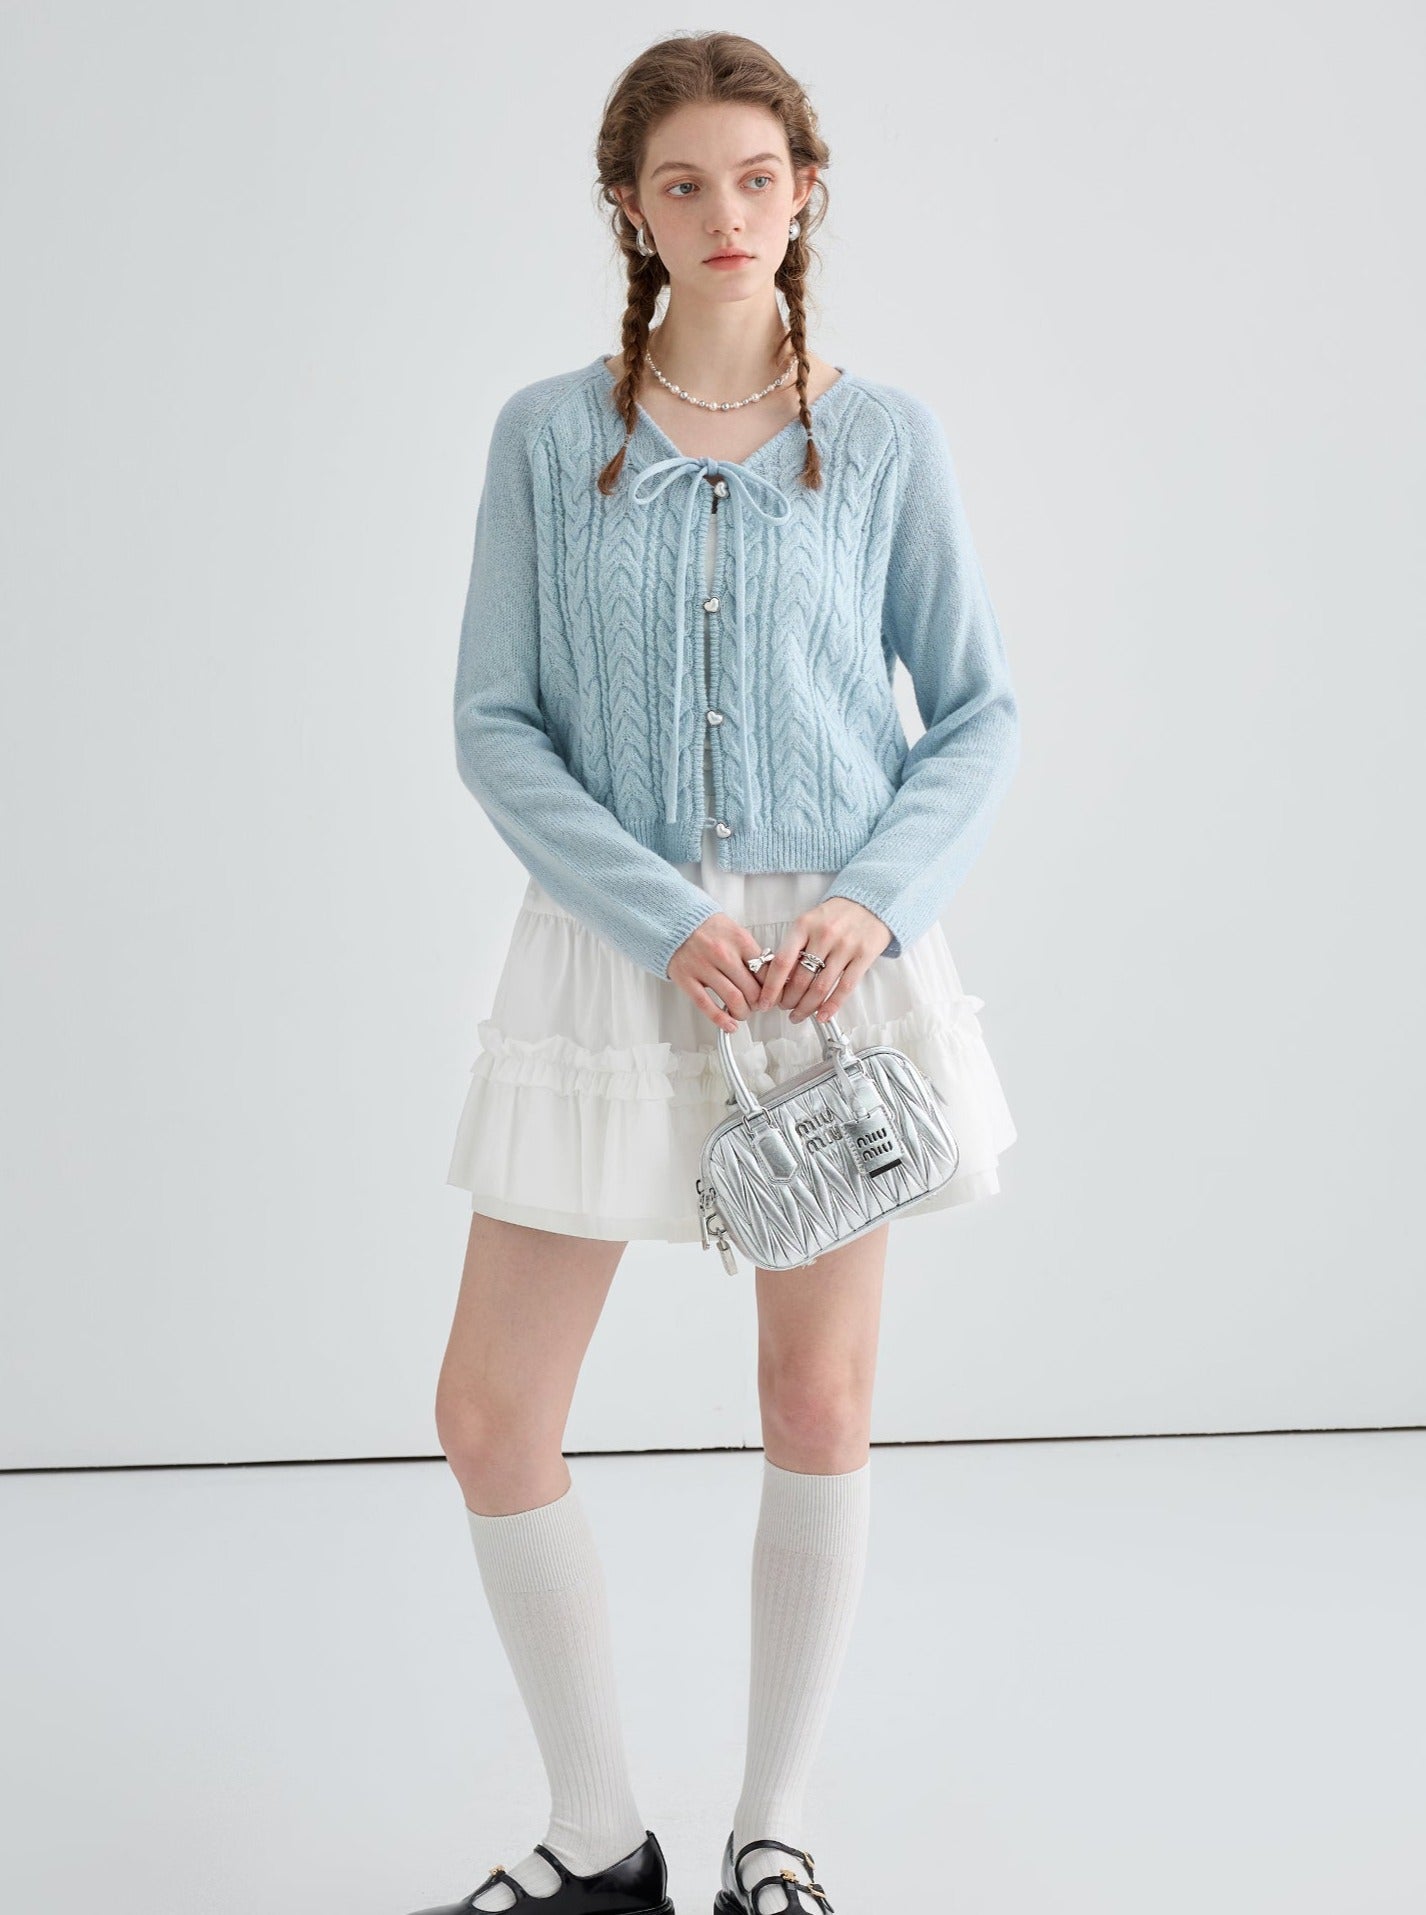 lace-up wool knitted cardigan top